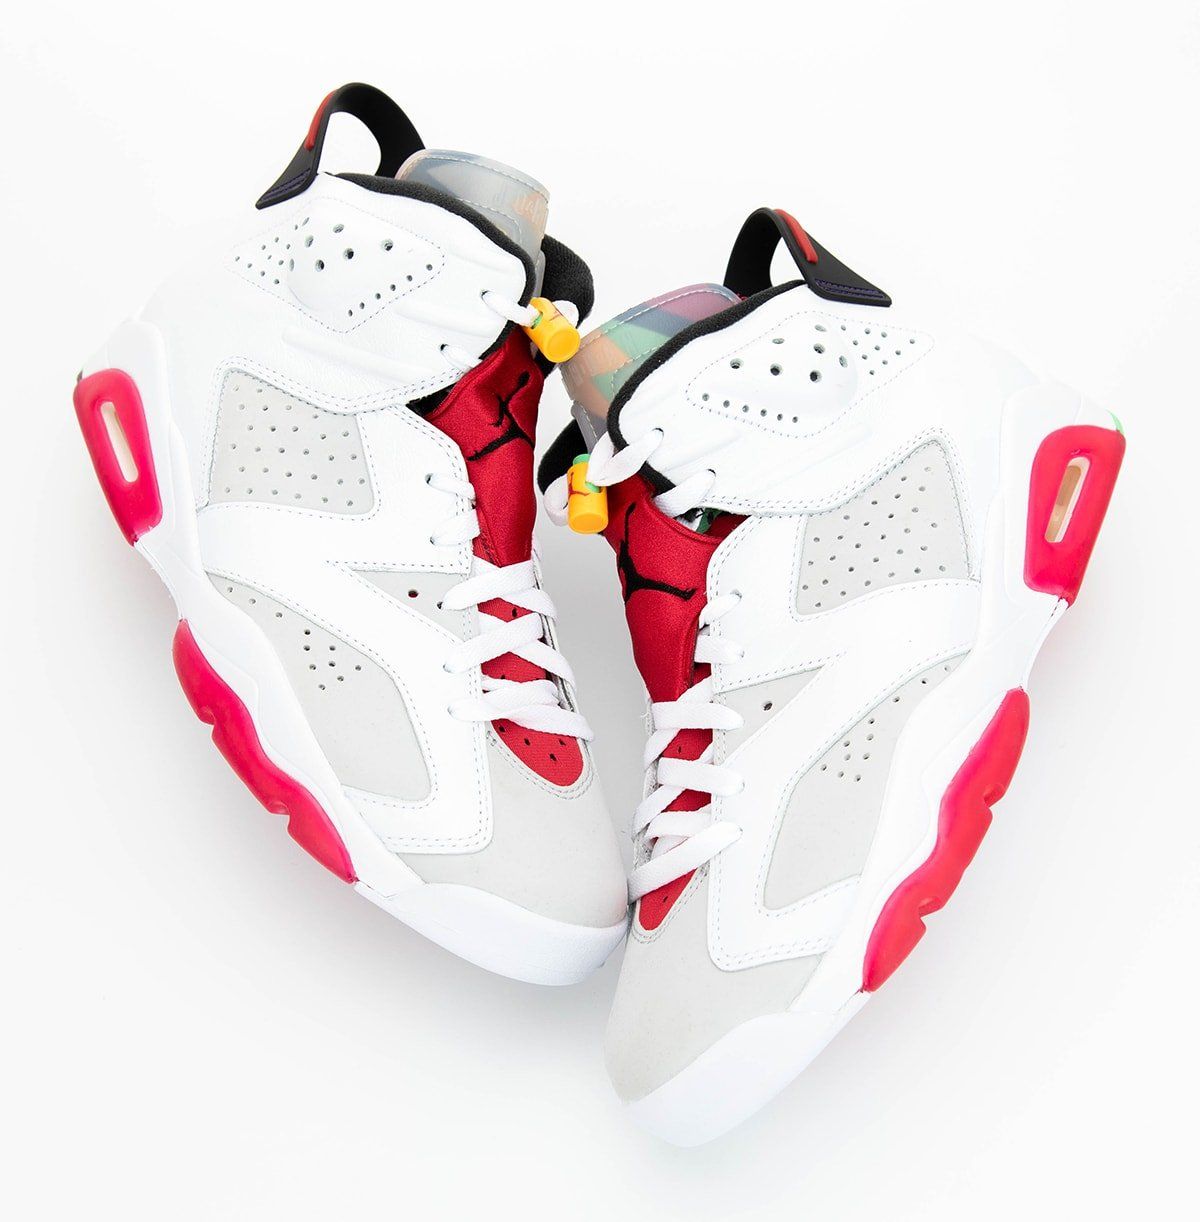 jordan 6 that just came out